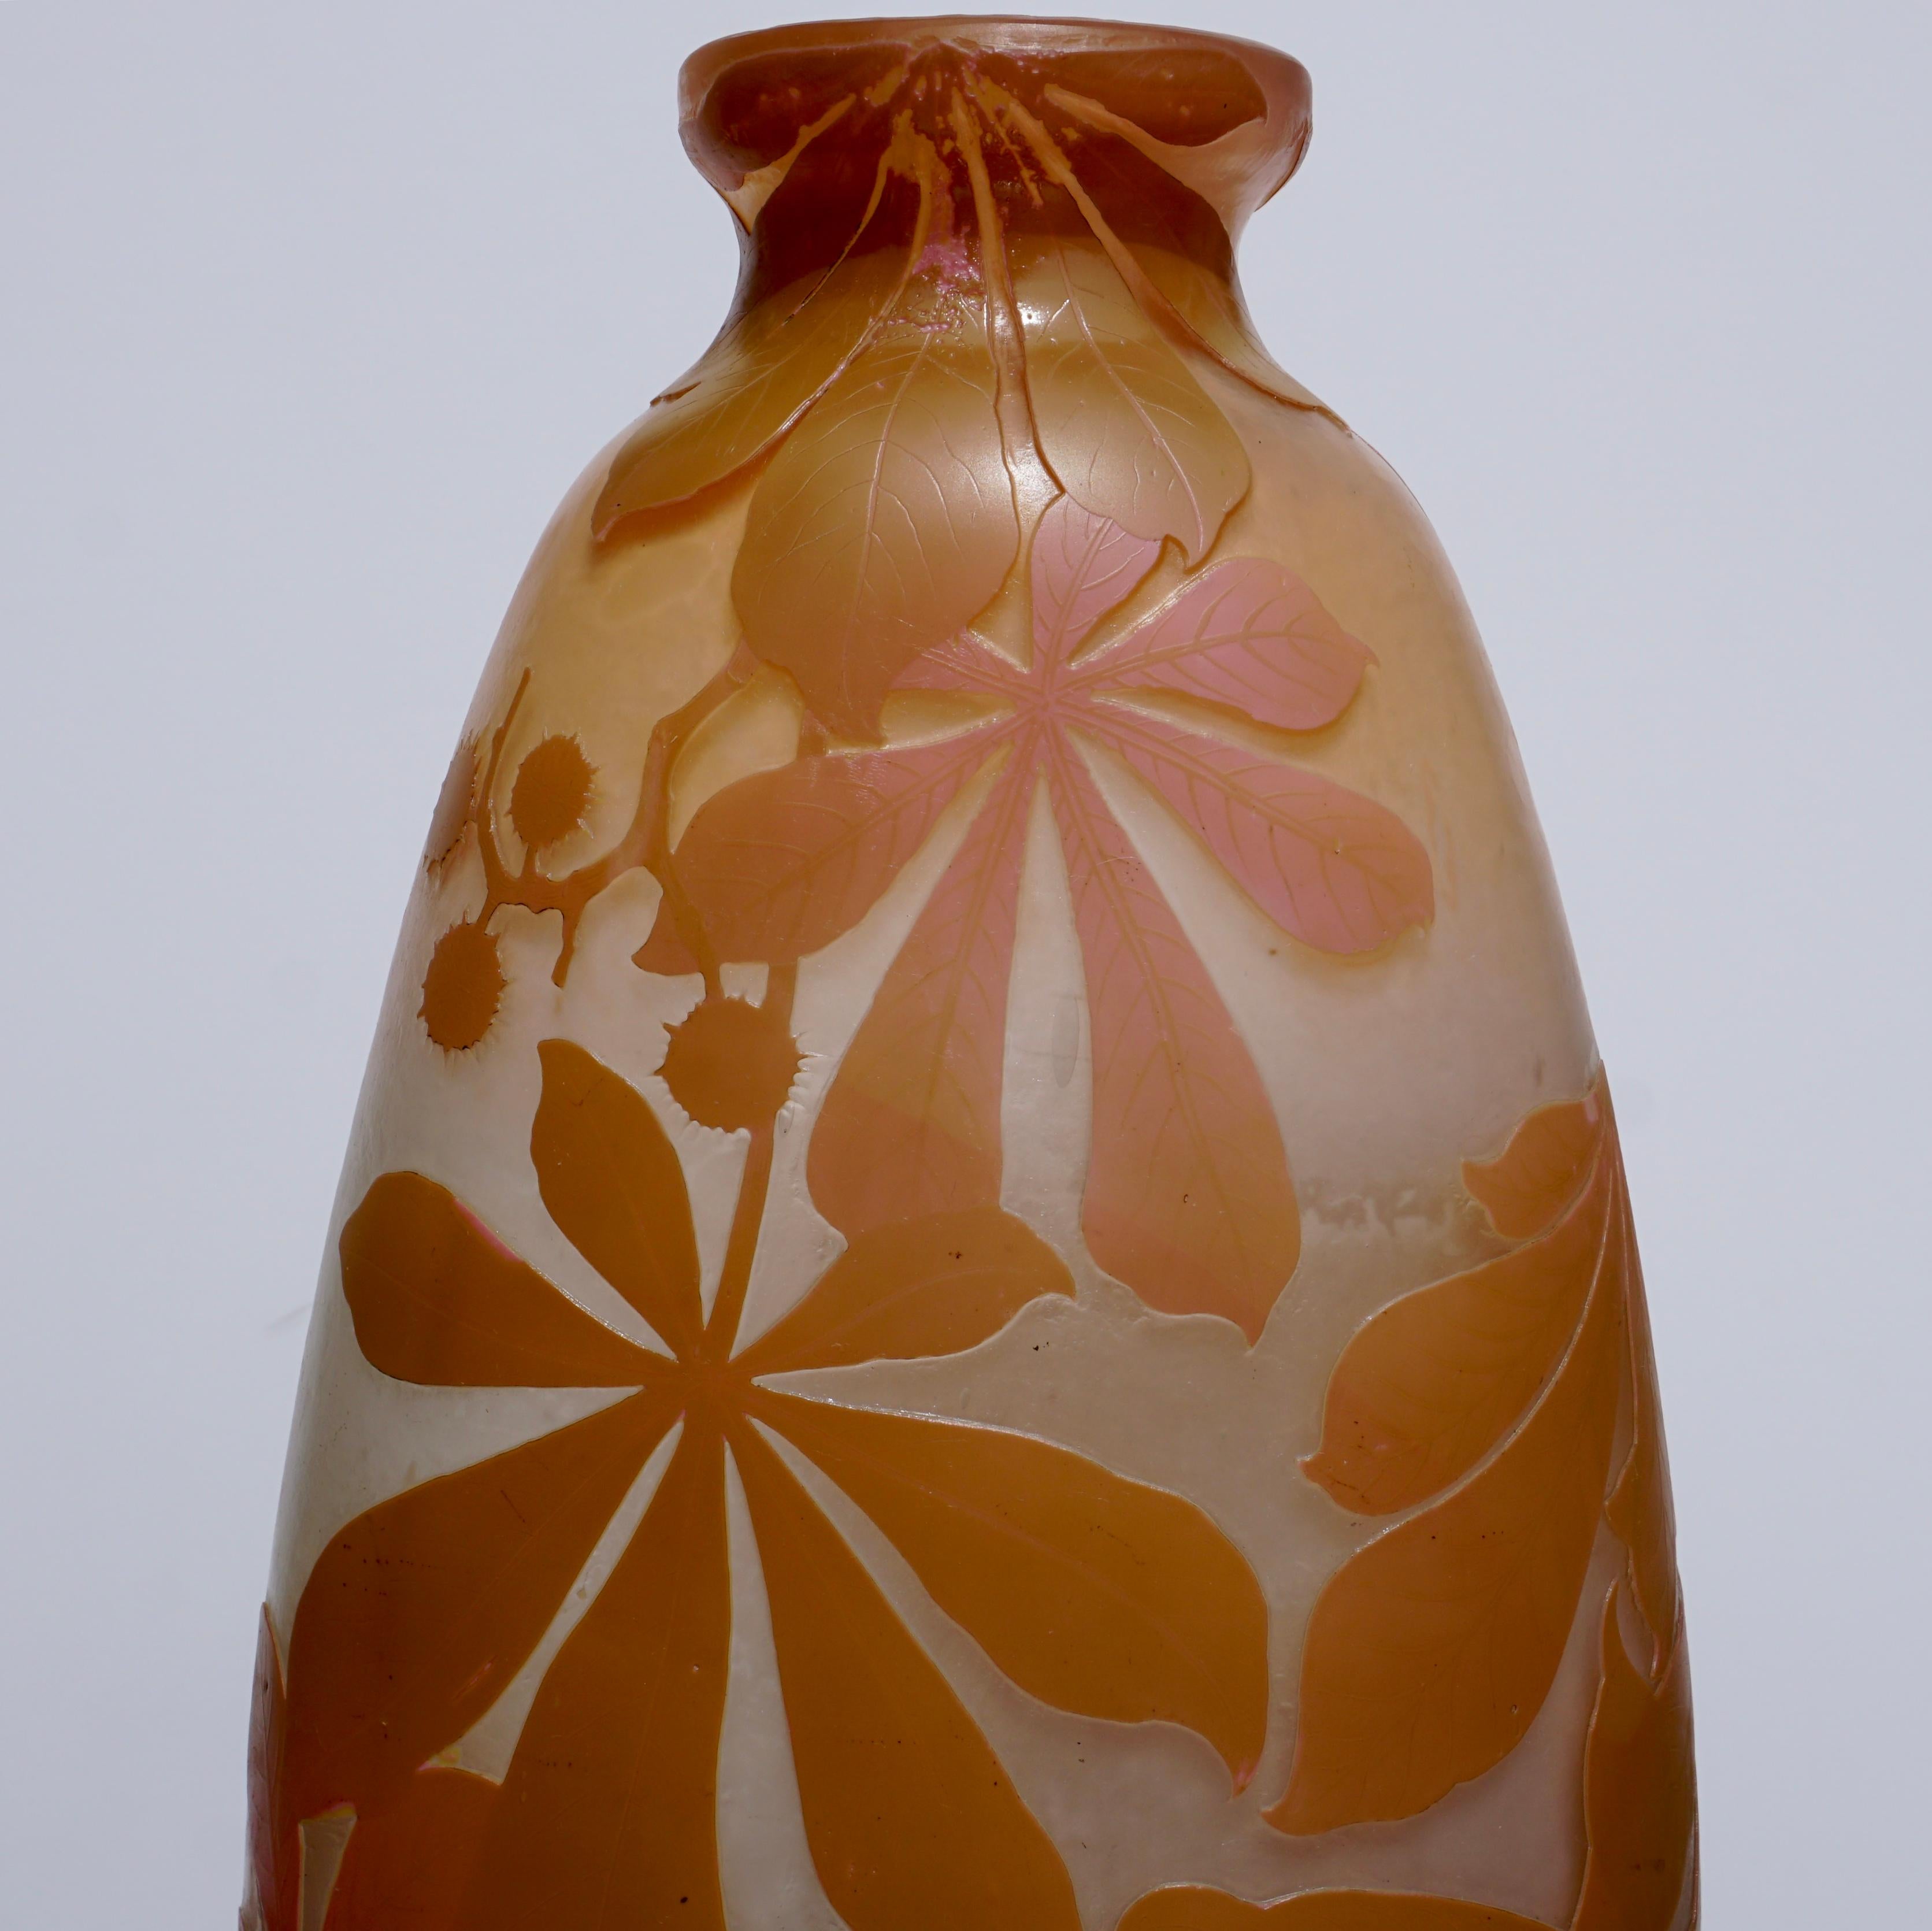 A stunning four color wheel carved and acid etched fat vase with pink, yellow, greenish browns and white on a cream background. The coloring is strong and the workmanship excellent. A truly explosive expression of flowering and seeding botanicals.